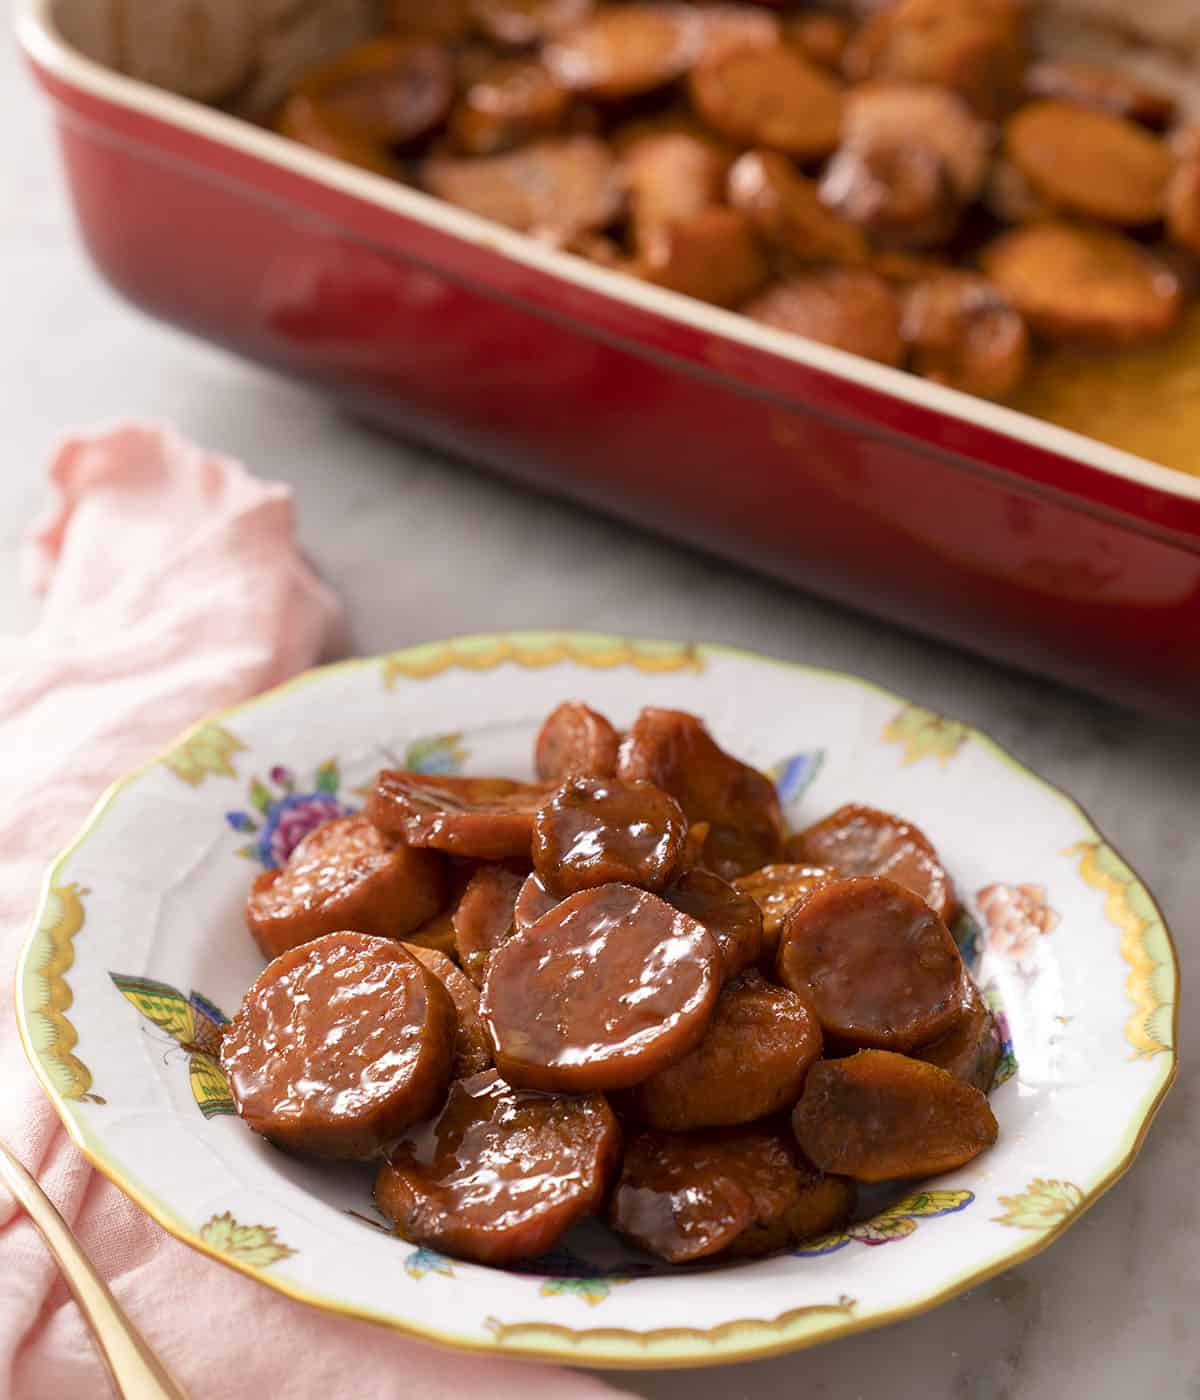 A porcelain plate with candied yams in front of a red baking dish.